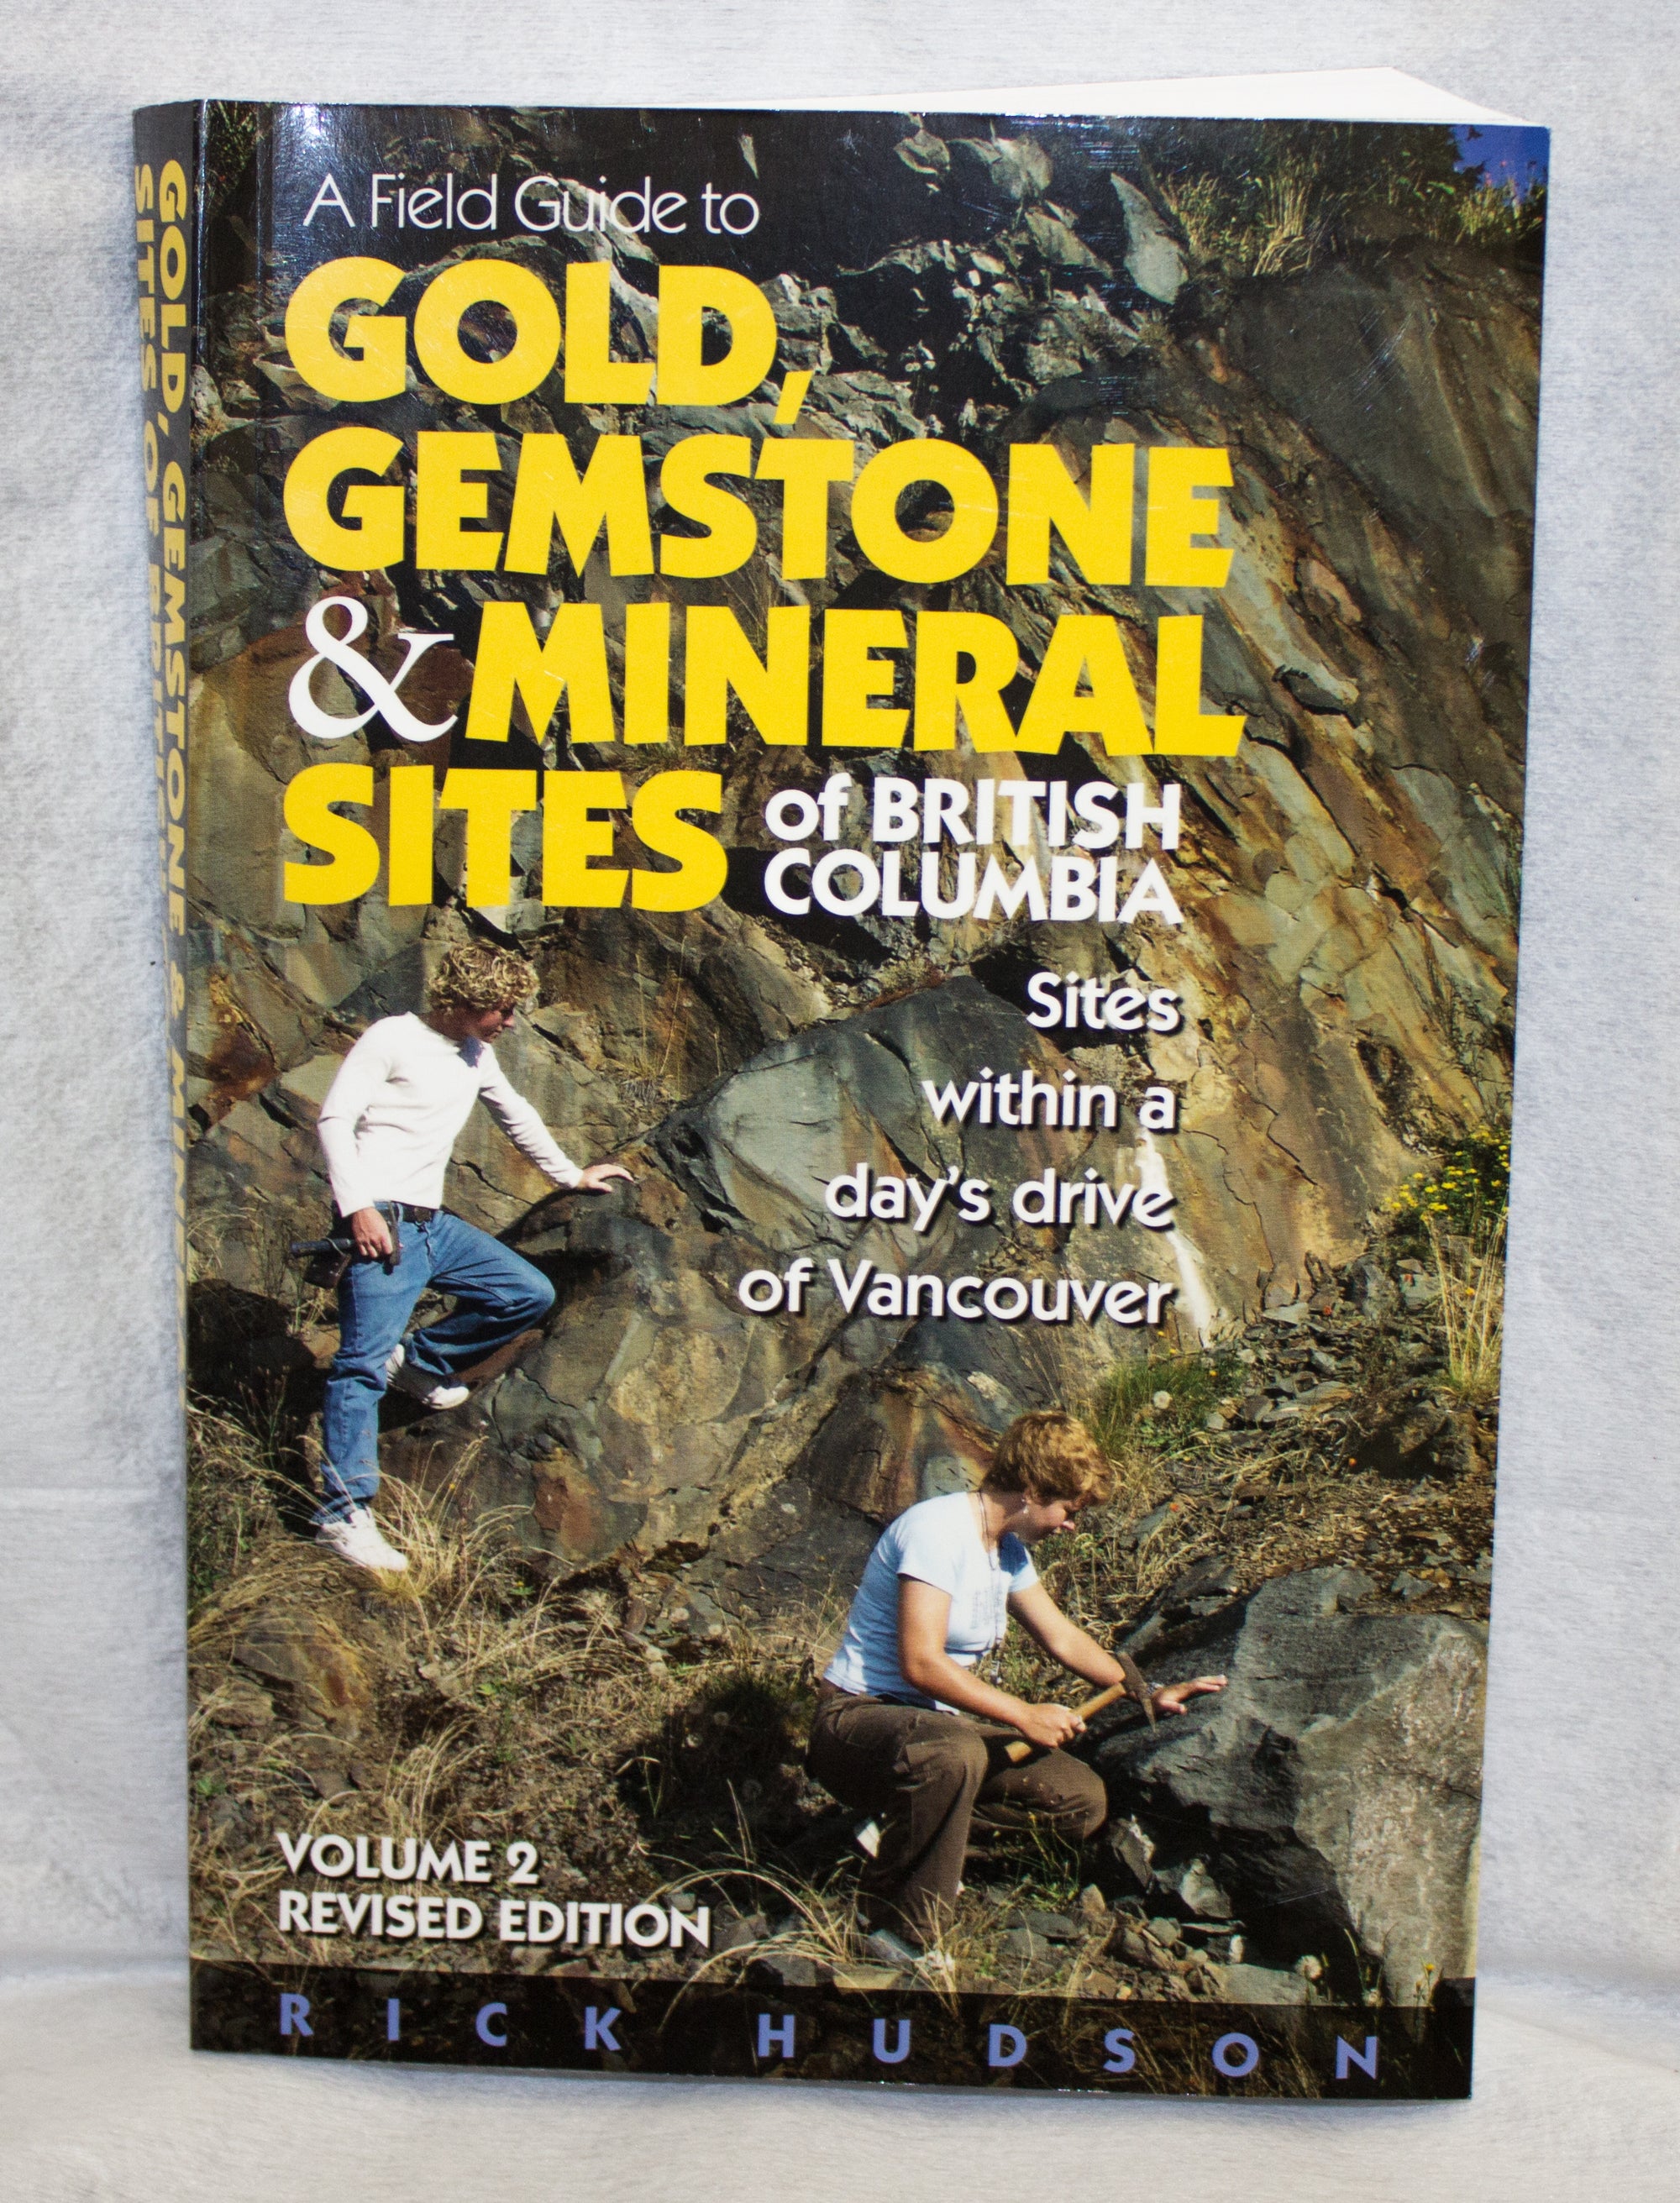 A Field Guide to Gold, Gemstone & Mineral Sites of British Columbia